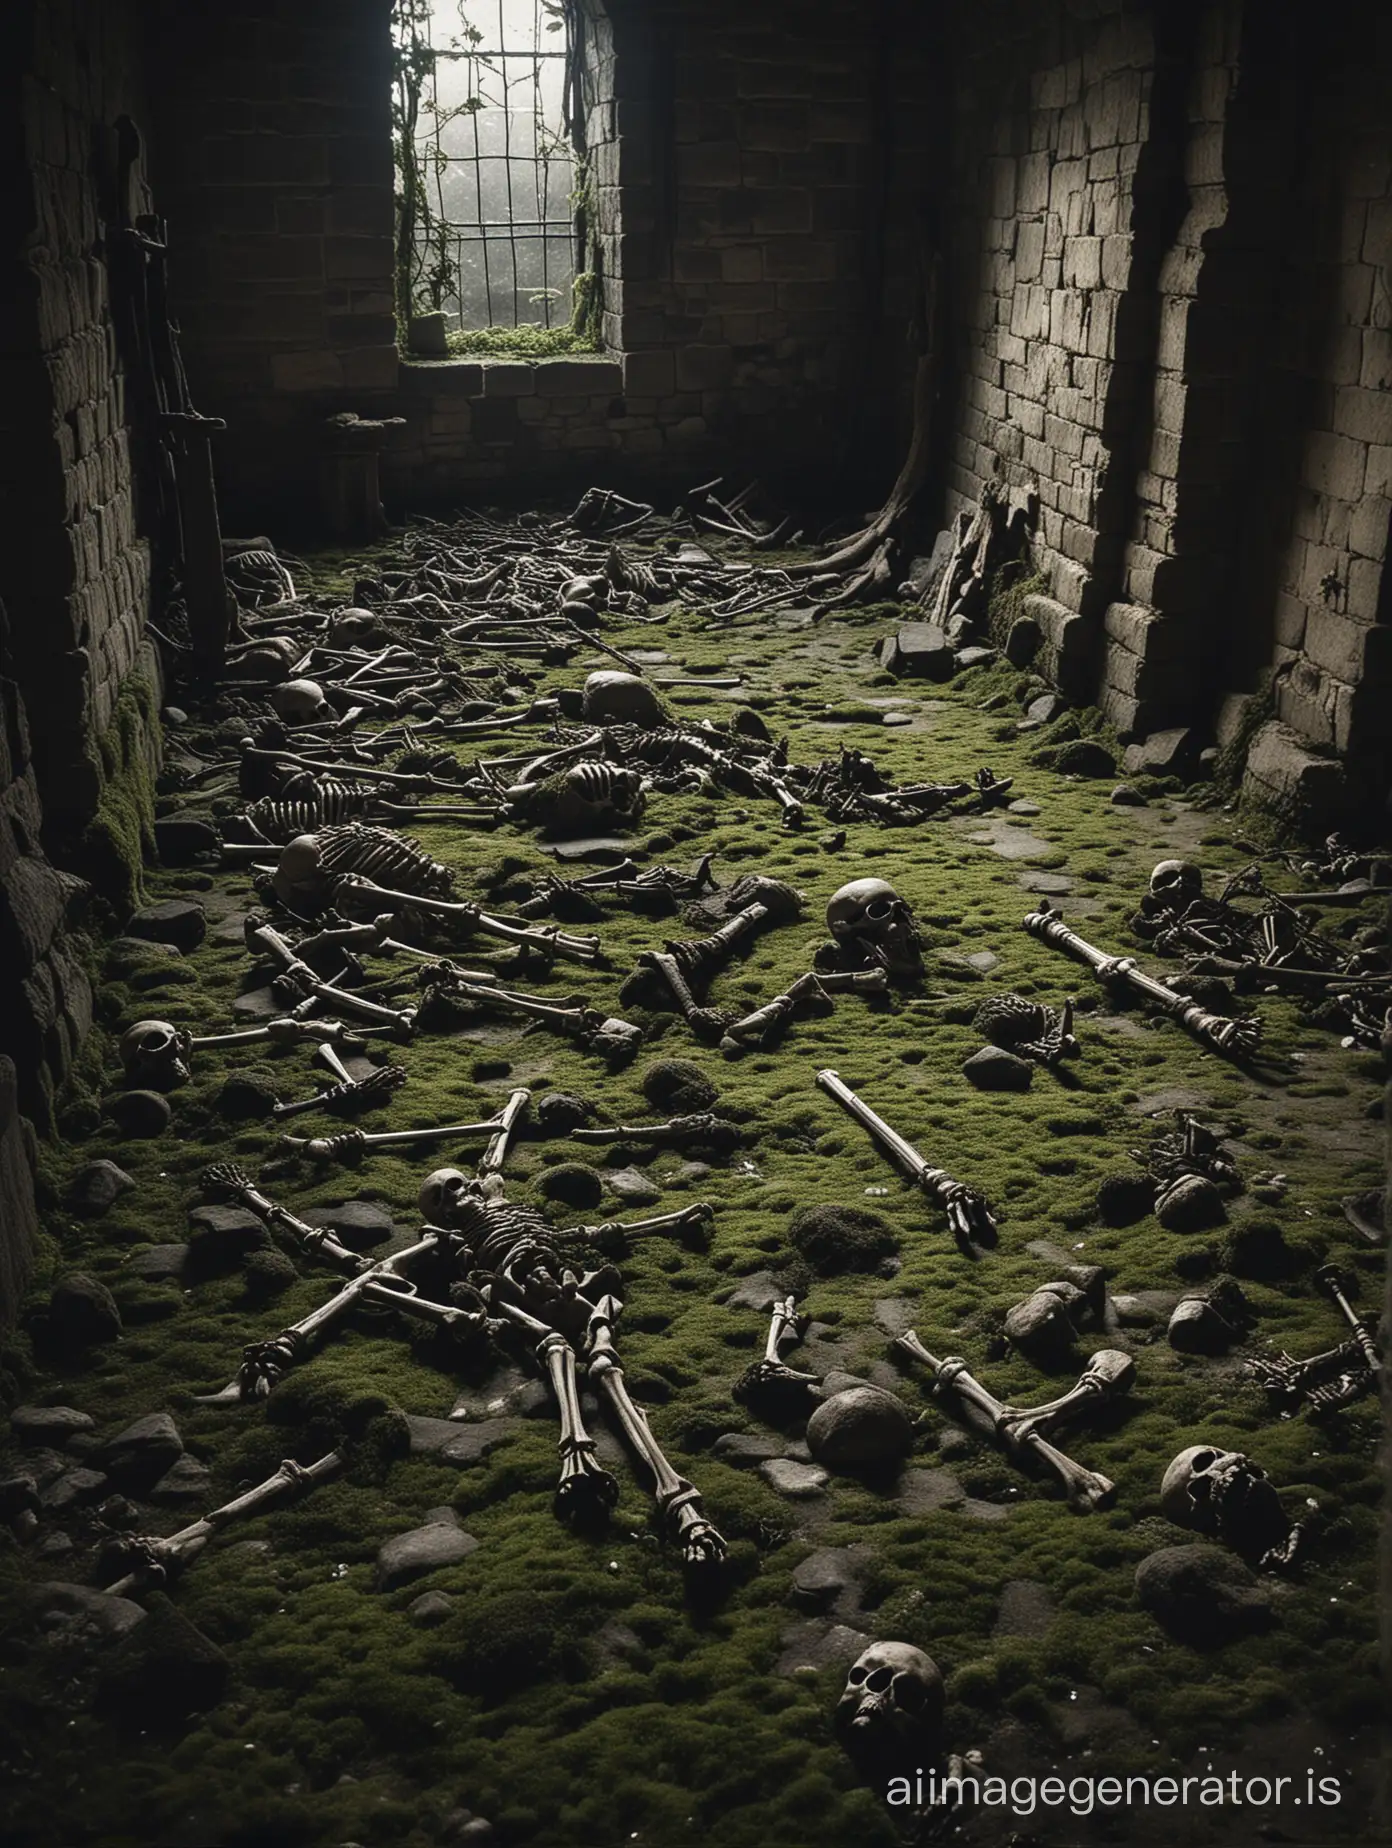 (monsters hiding in shadows) in an old dungeon. [skeleton] bones, armor, weapons scattered around the floor. very low light. moss and floor and walls.